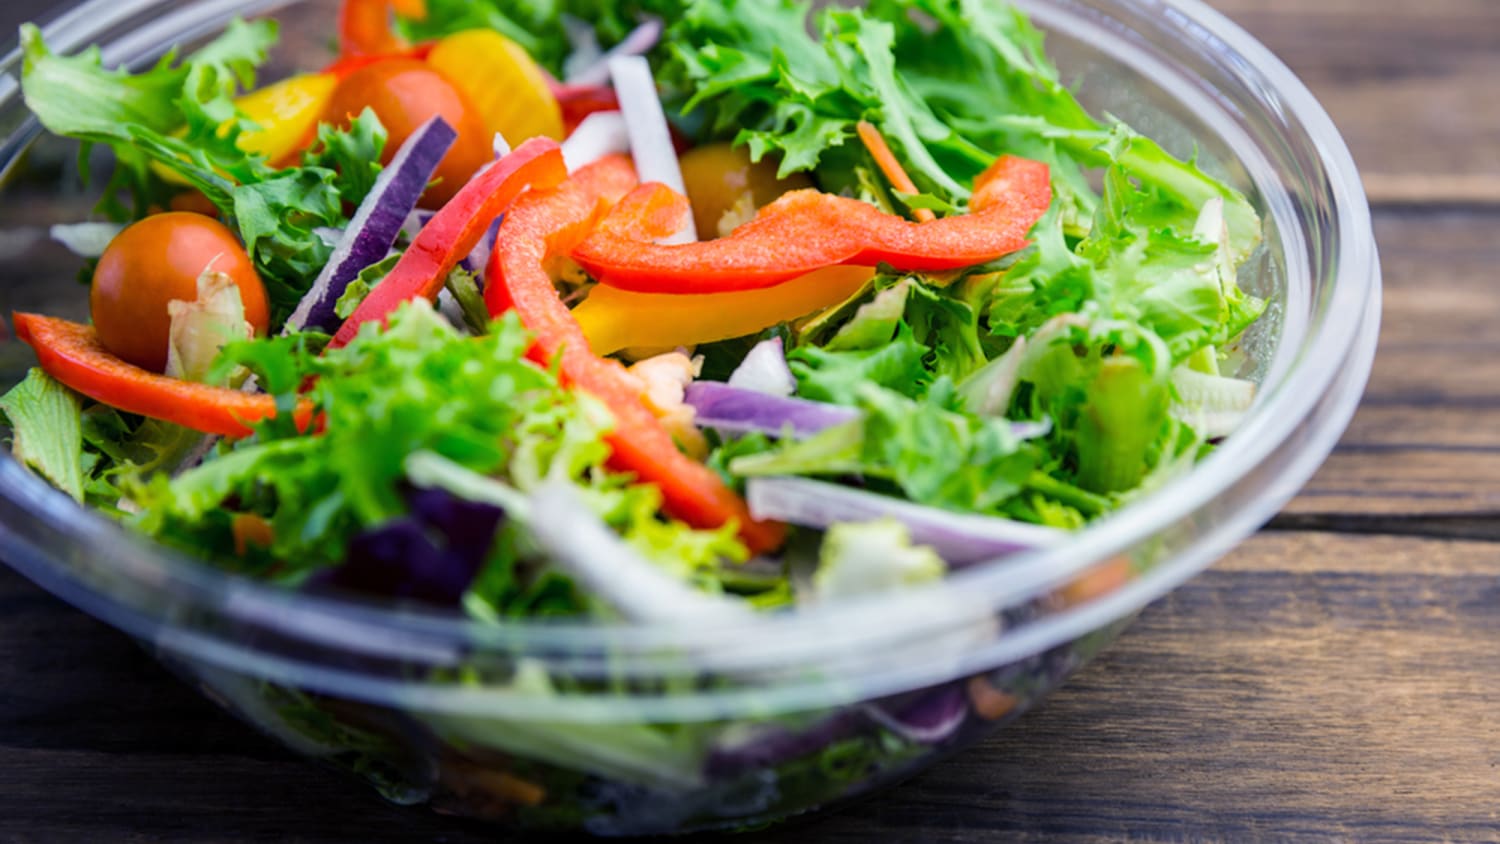 How to order a healthy salad: 8 smart tips for what to eat and what to avoid